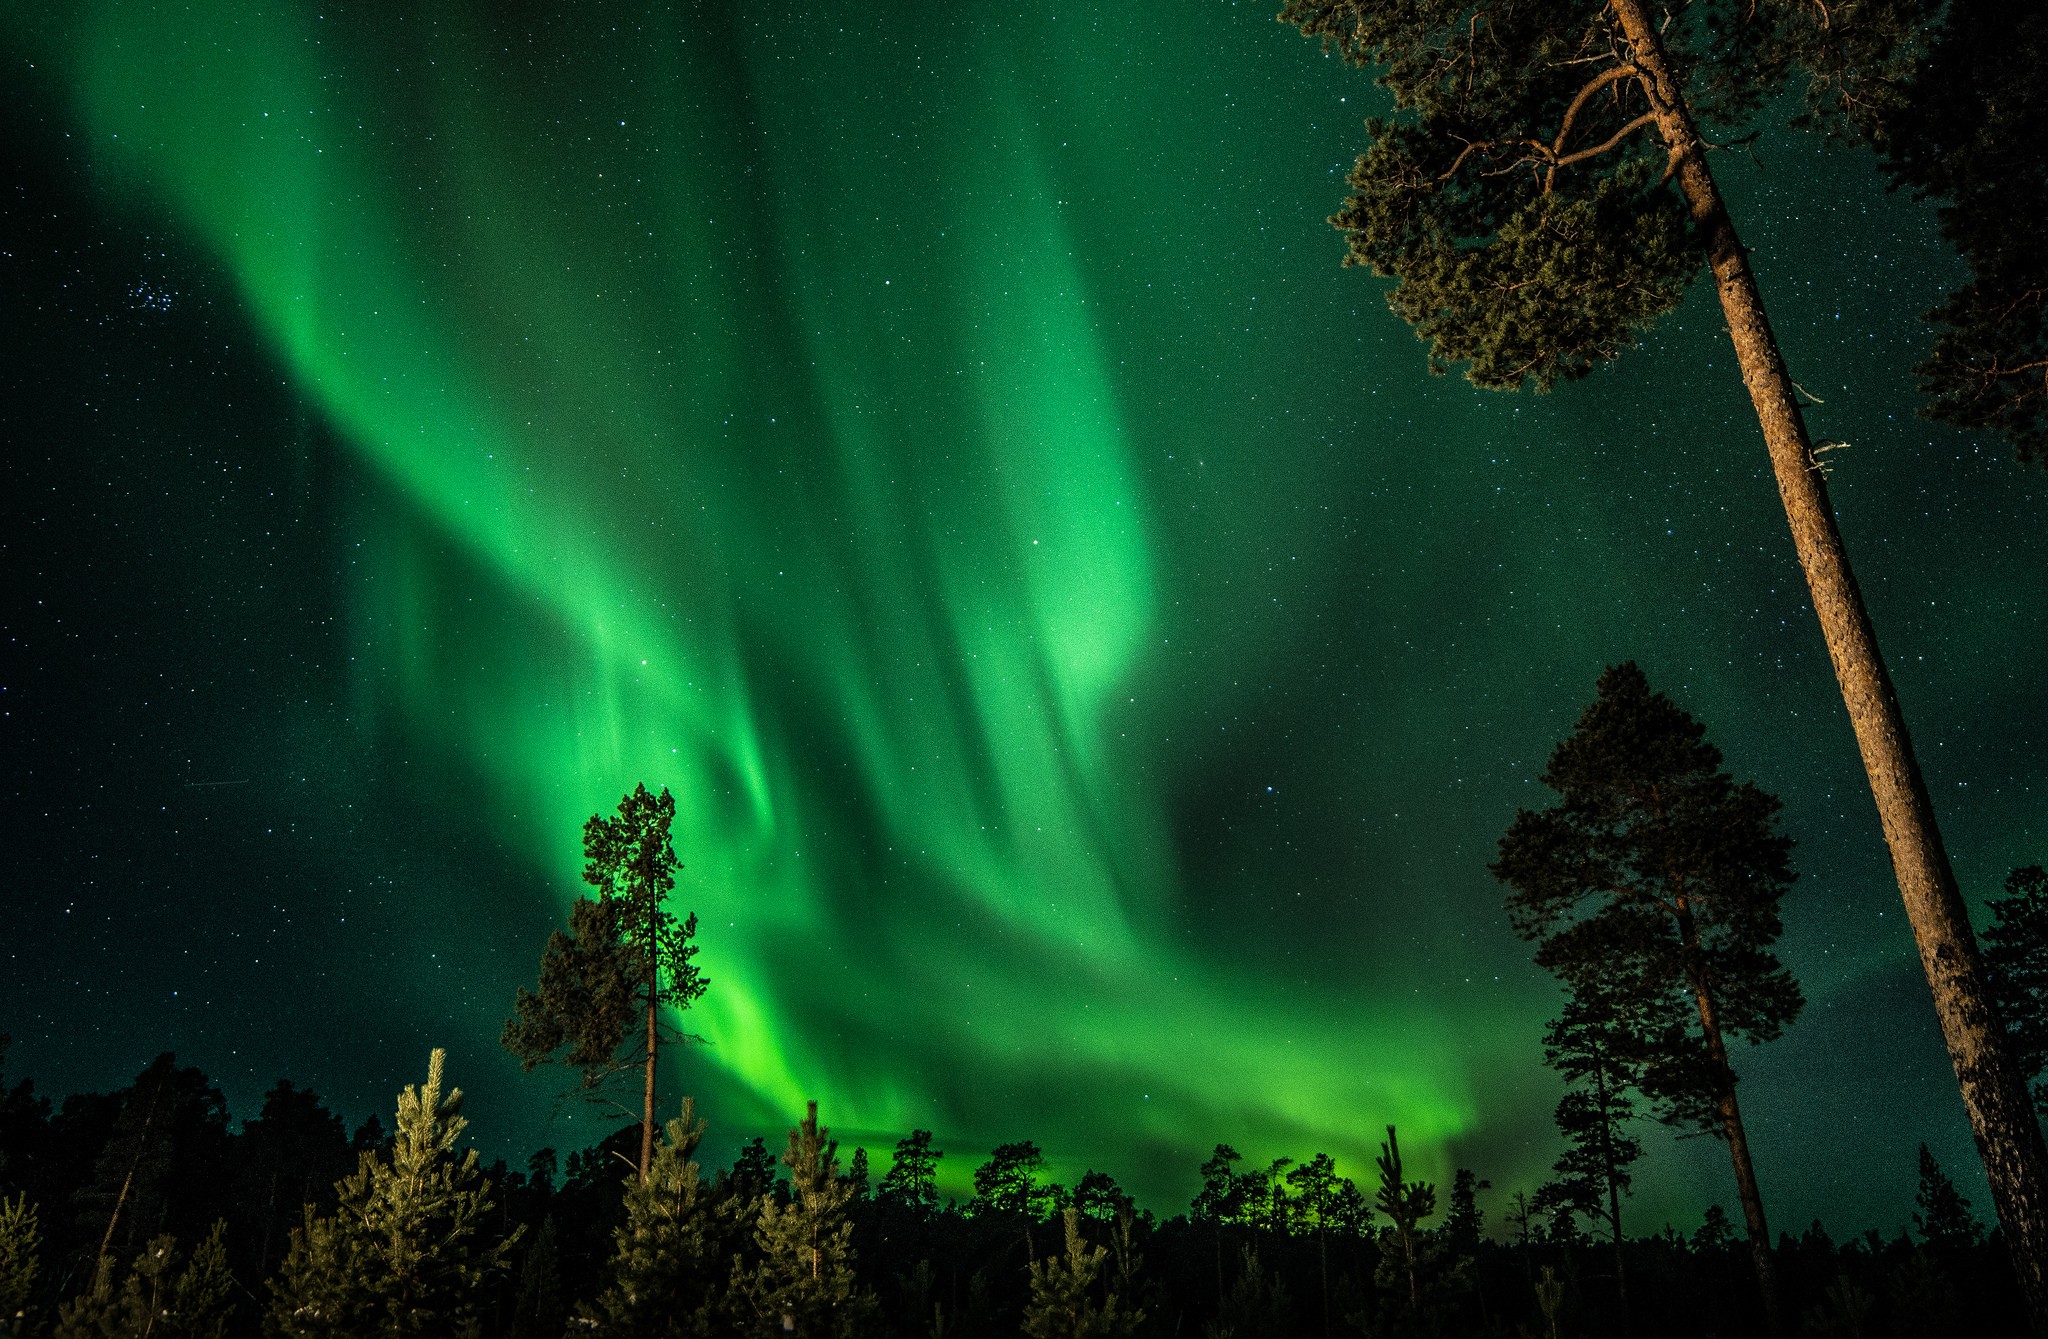 General 2048x1339 trees aurorae landscape green night sky looking up low light